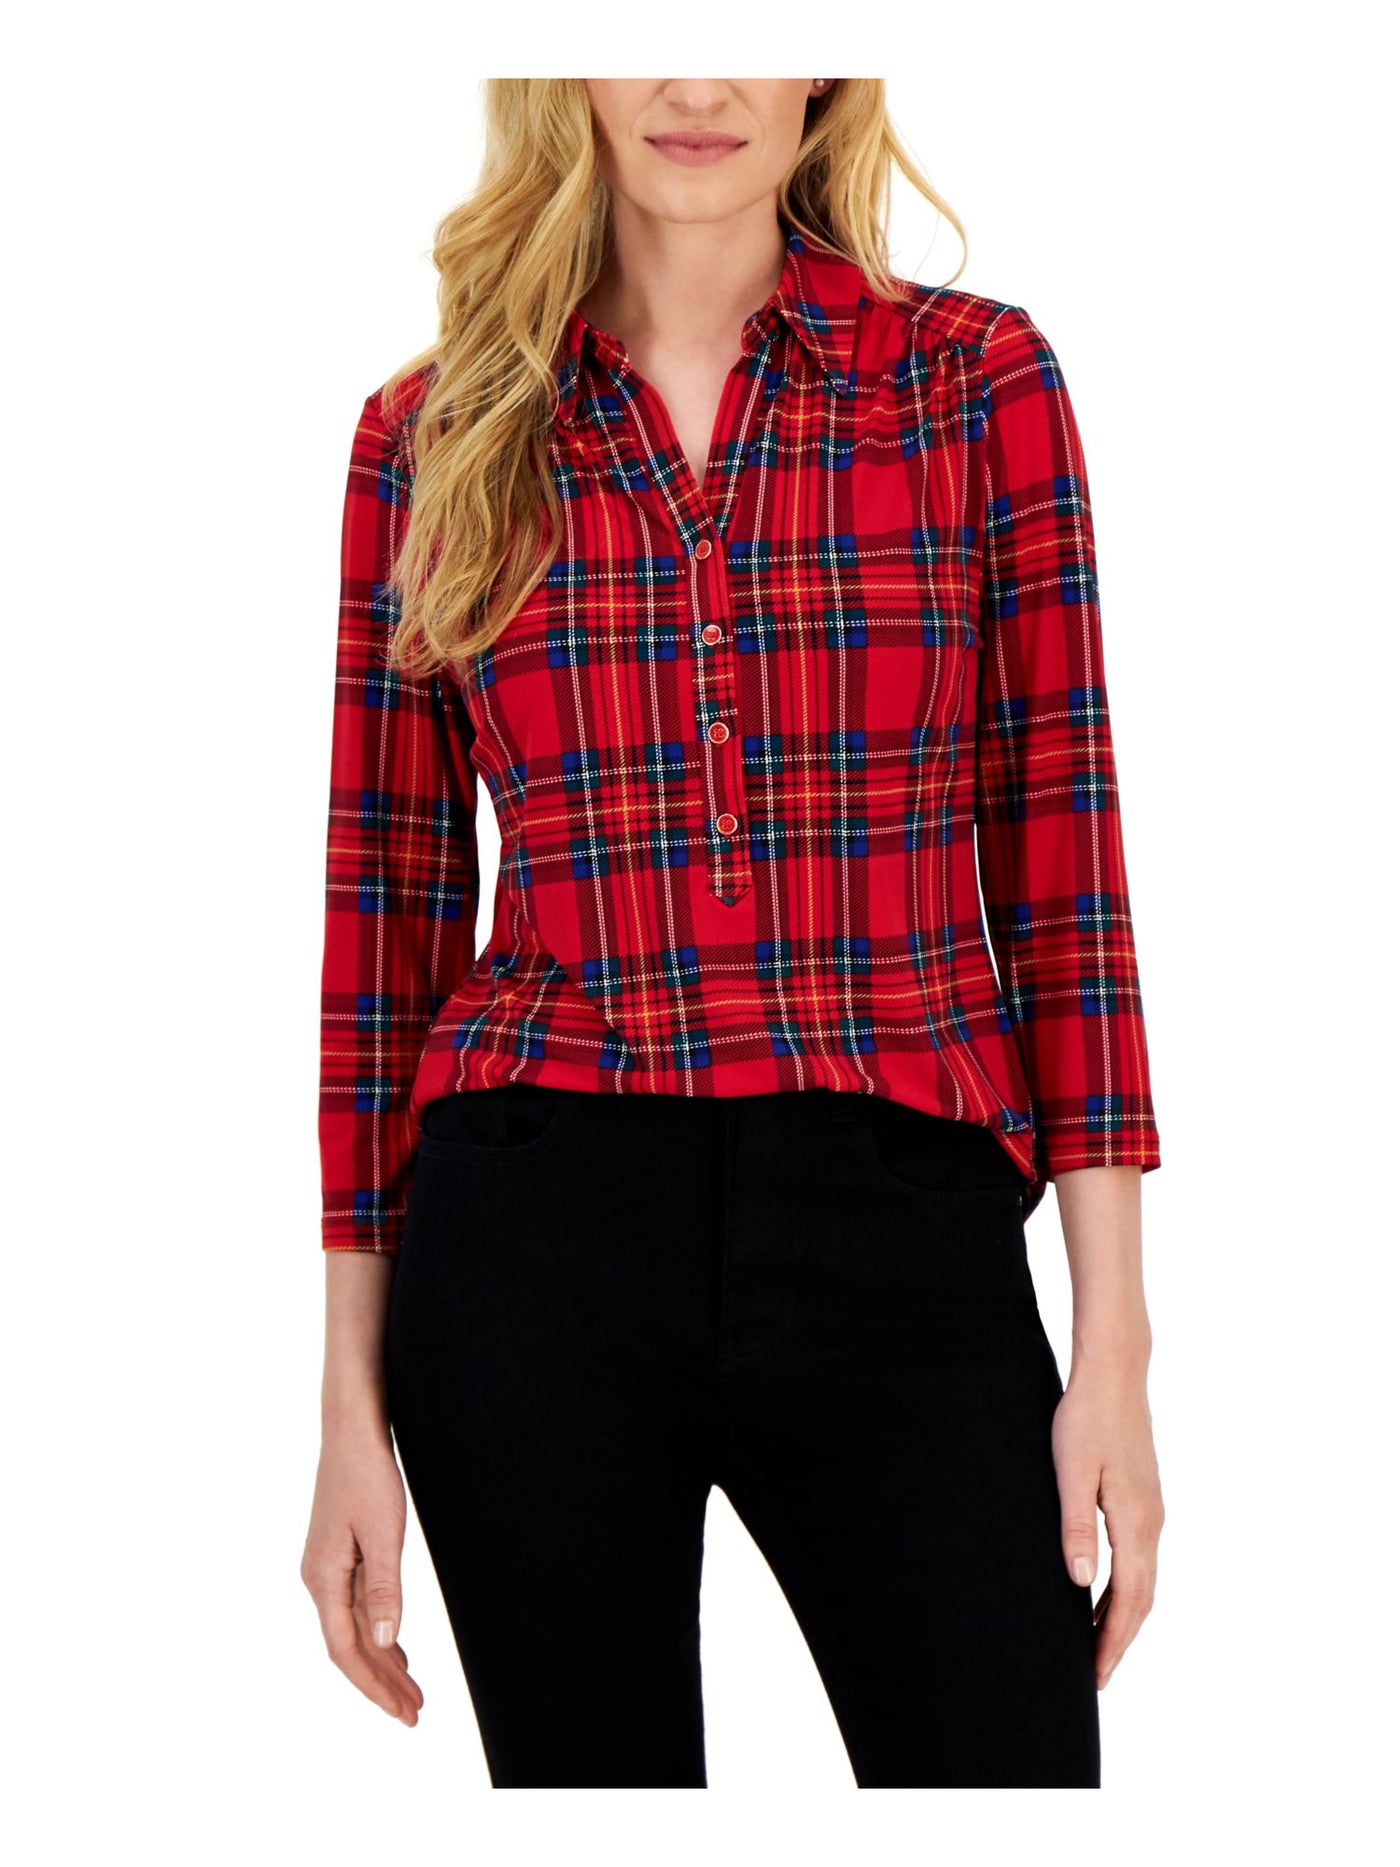 CHARTER CLUB Womens Red Stretch Plaid 3/4 Sleeve Collared Top S